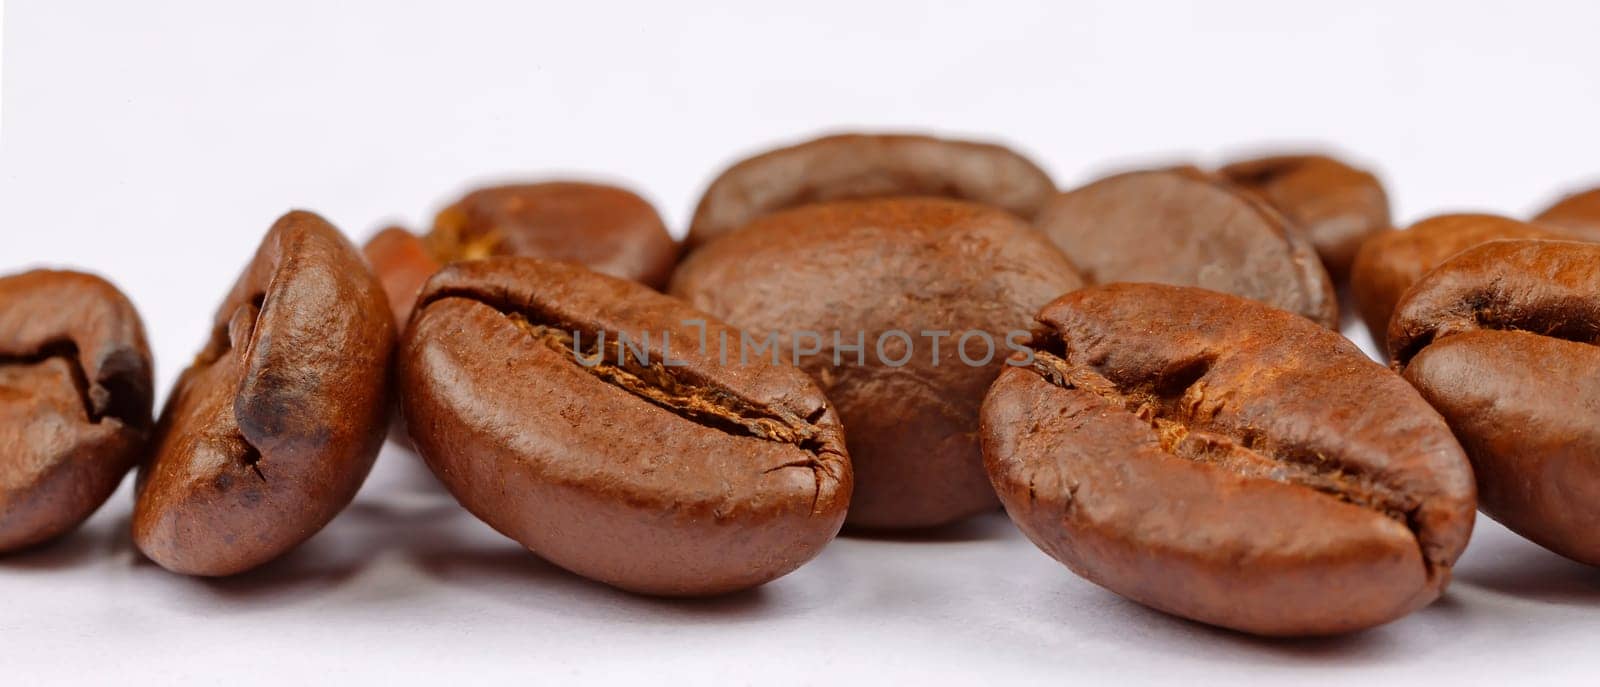 Panoramic view of coffee beans on white background